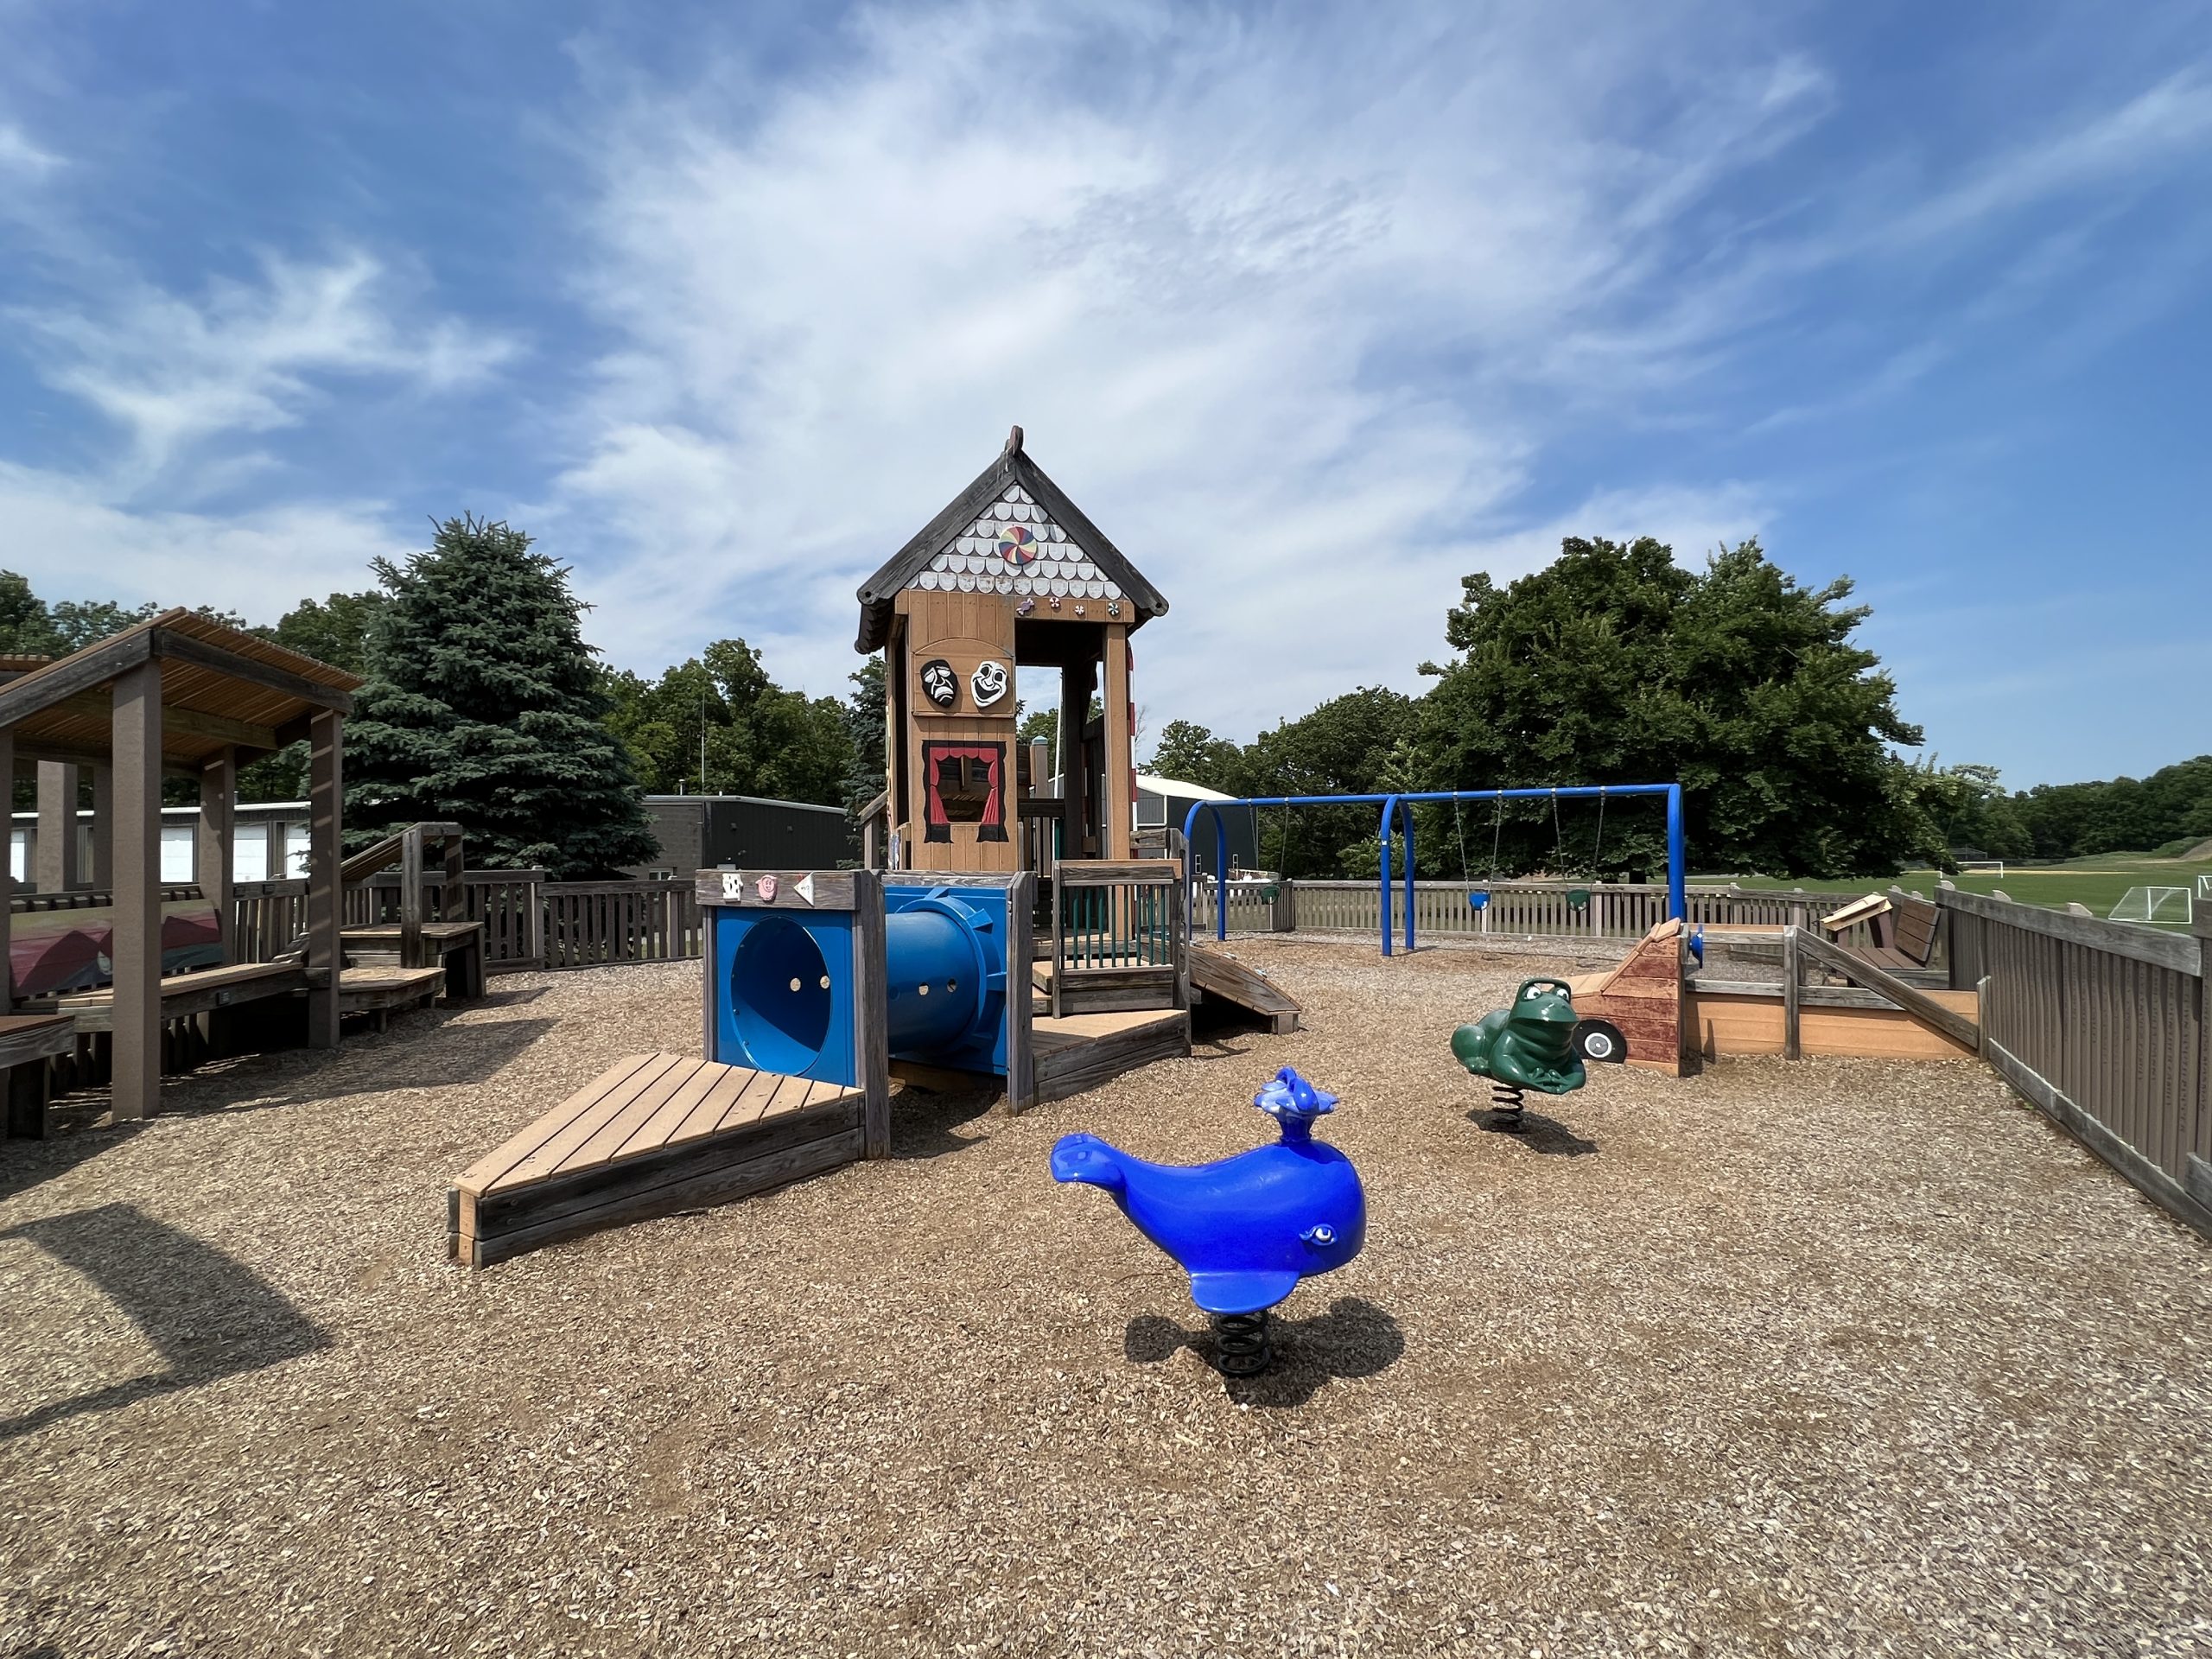 Sycamore Park Playground in Blairstown NJ - TOT LOT - WIDE shot